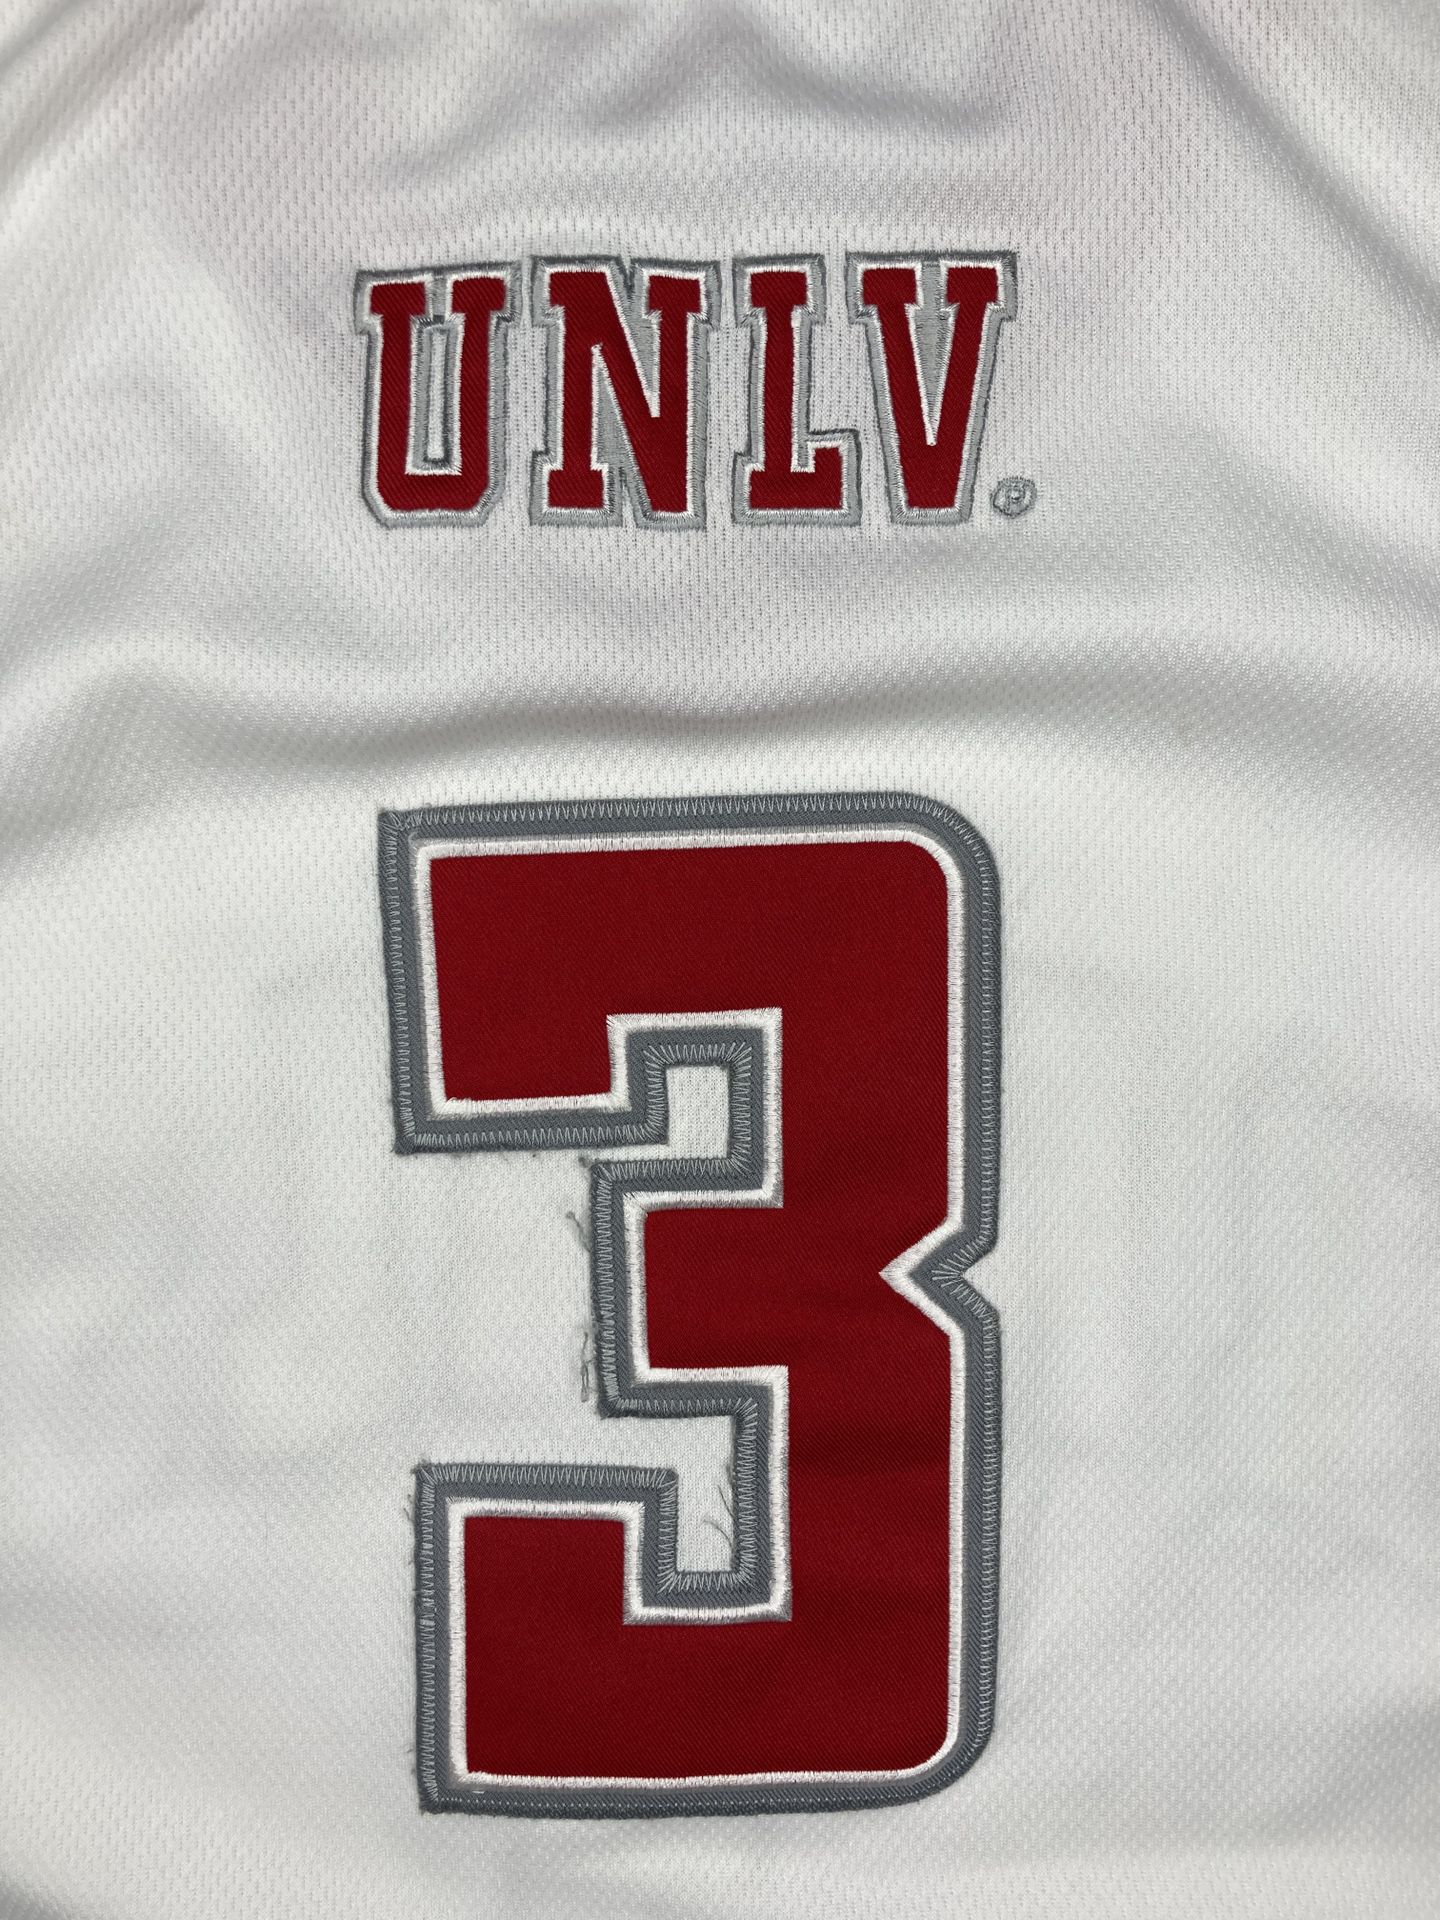 UNLV Fighting Rebels Basketball Jersey Size Small for Sale in Long Beach,  CA - OfferUp